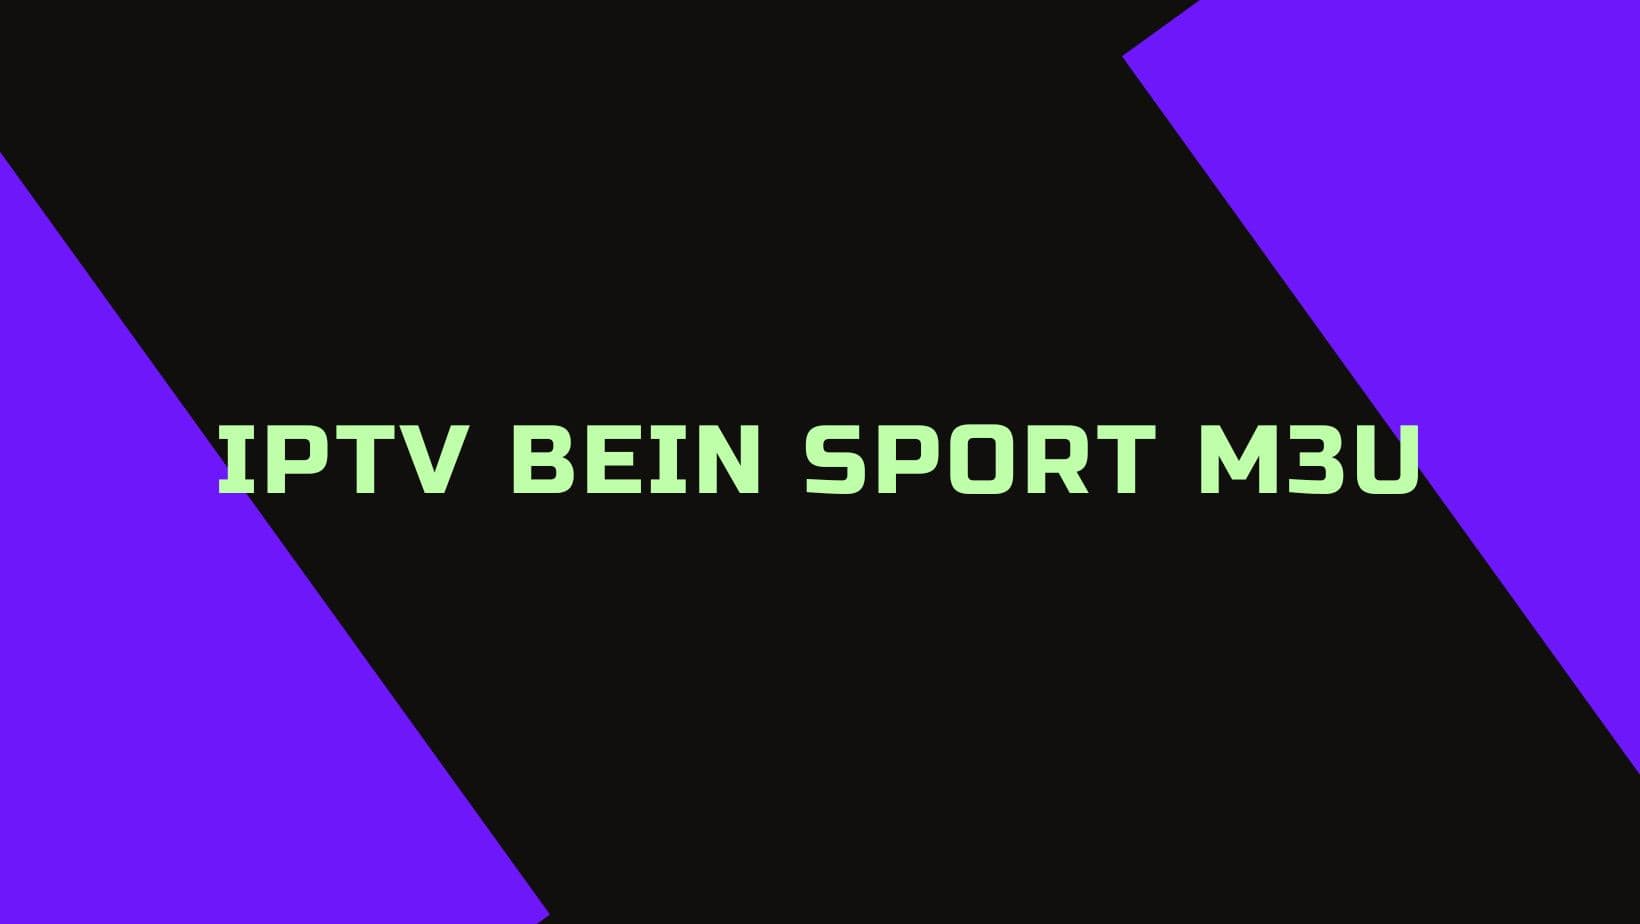 You are currently viewing IPTV Bein Sport M3U